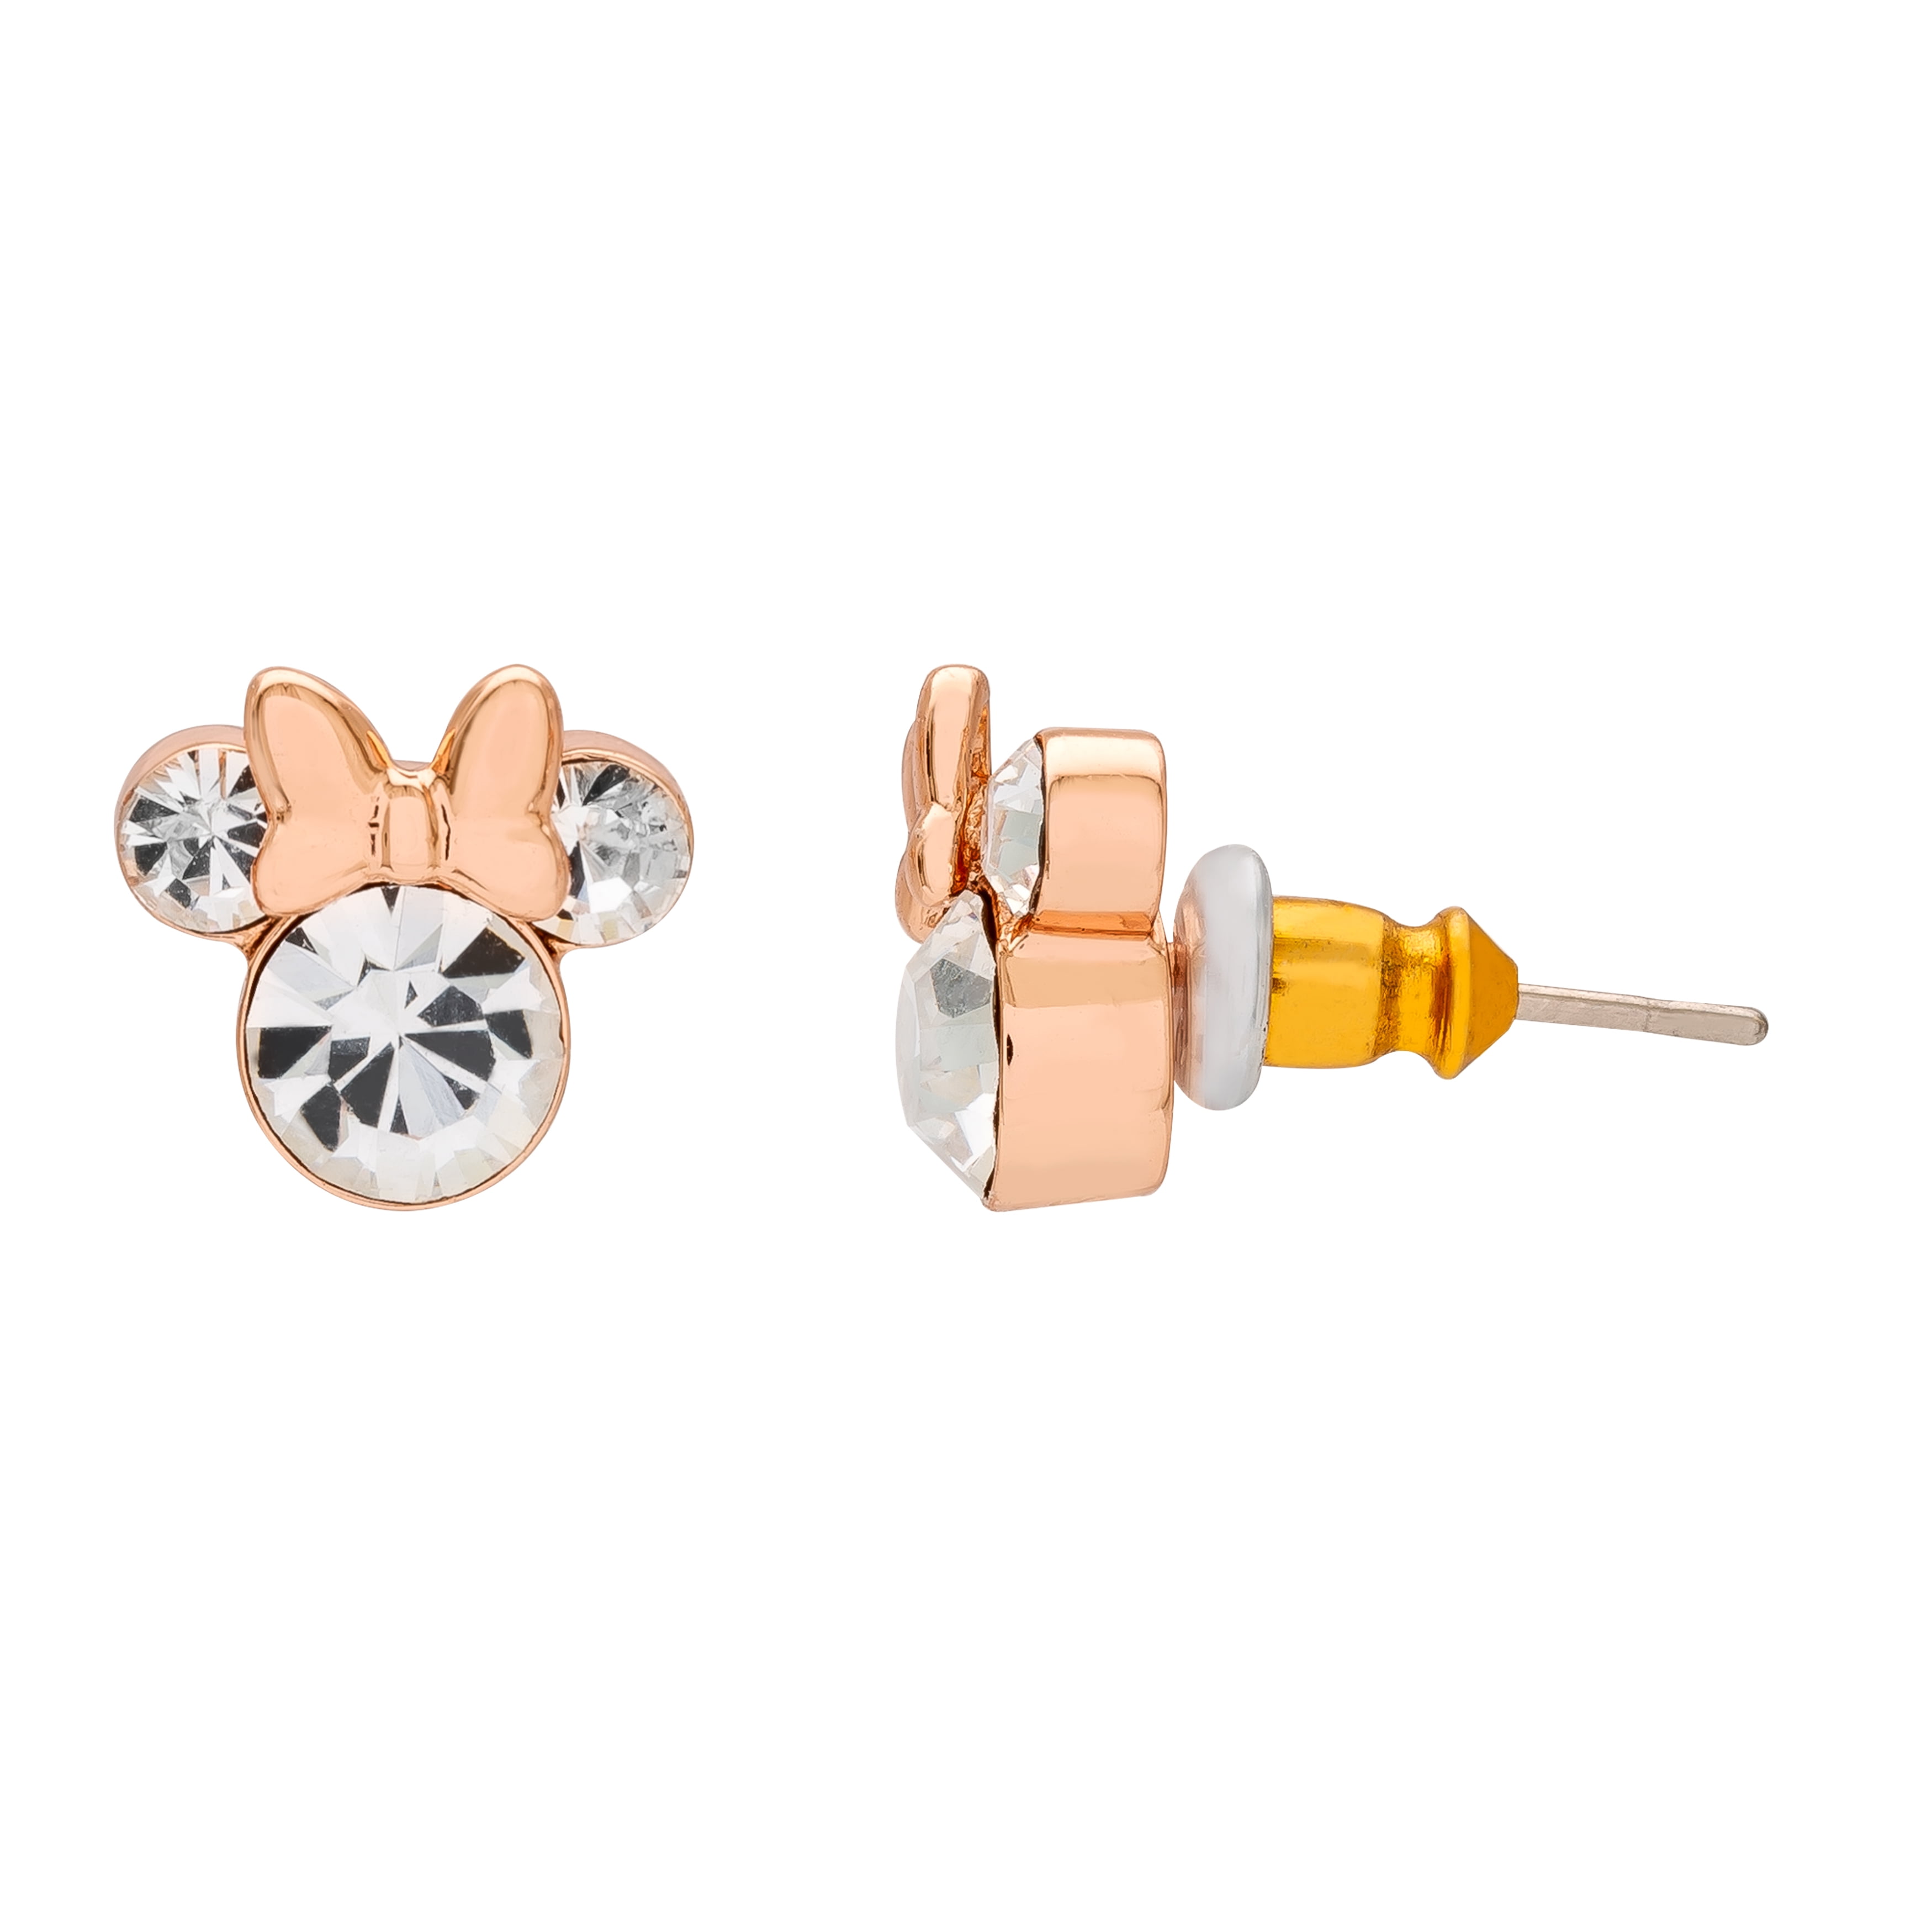 Minnie Mouse Stone Set Silver and Rose Gold Earrings EF00469PAPRL.PS :  Amazon.co.uk: Fashion